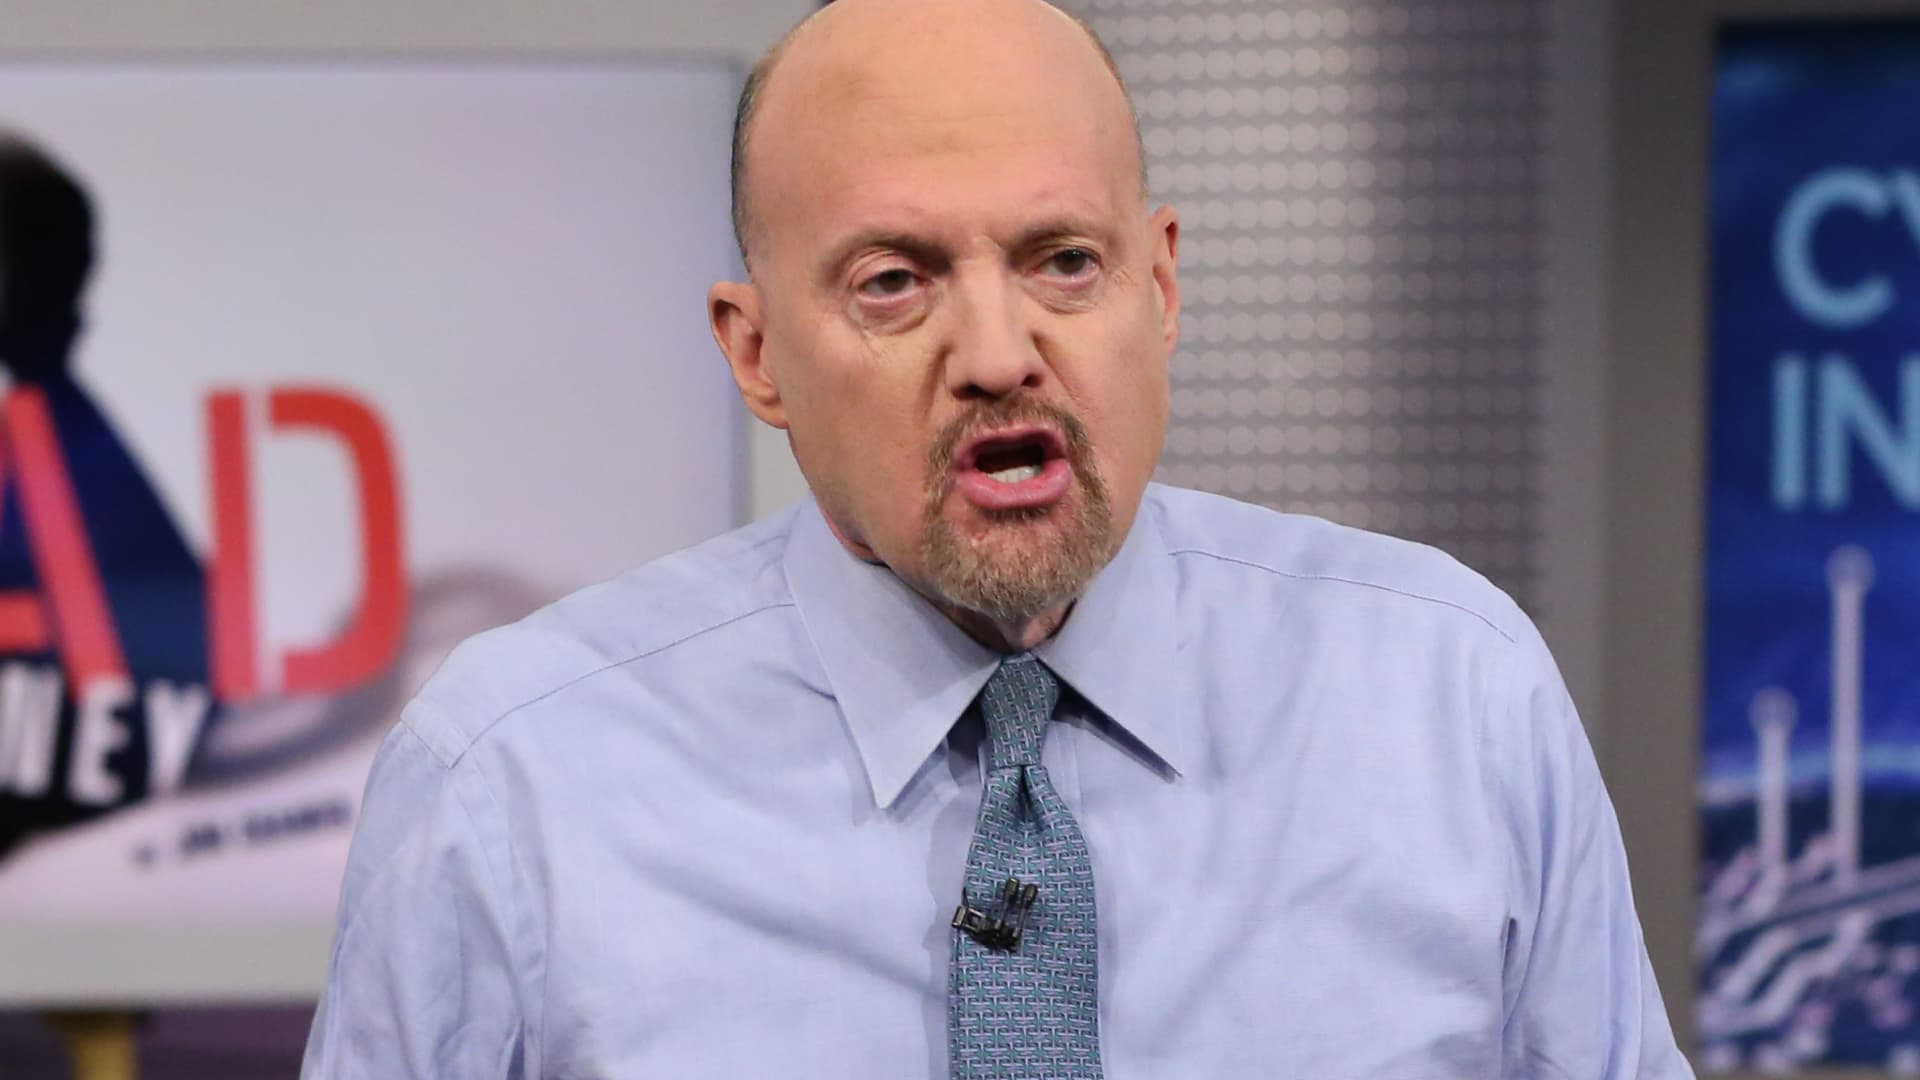 Jim Cramer’s week ahead: Nonfarm payroll data and Disney’s proxy fight comes to a head